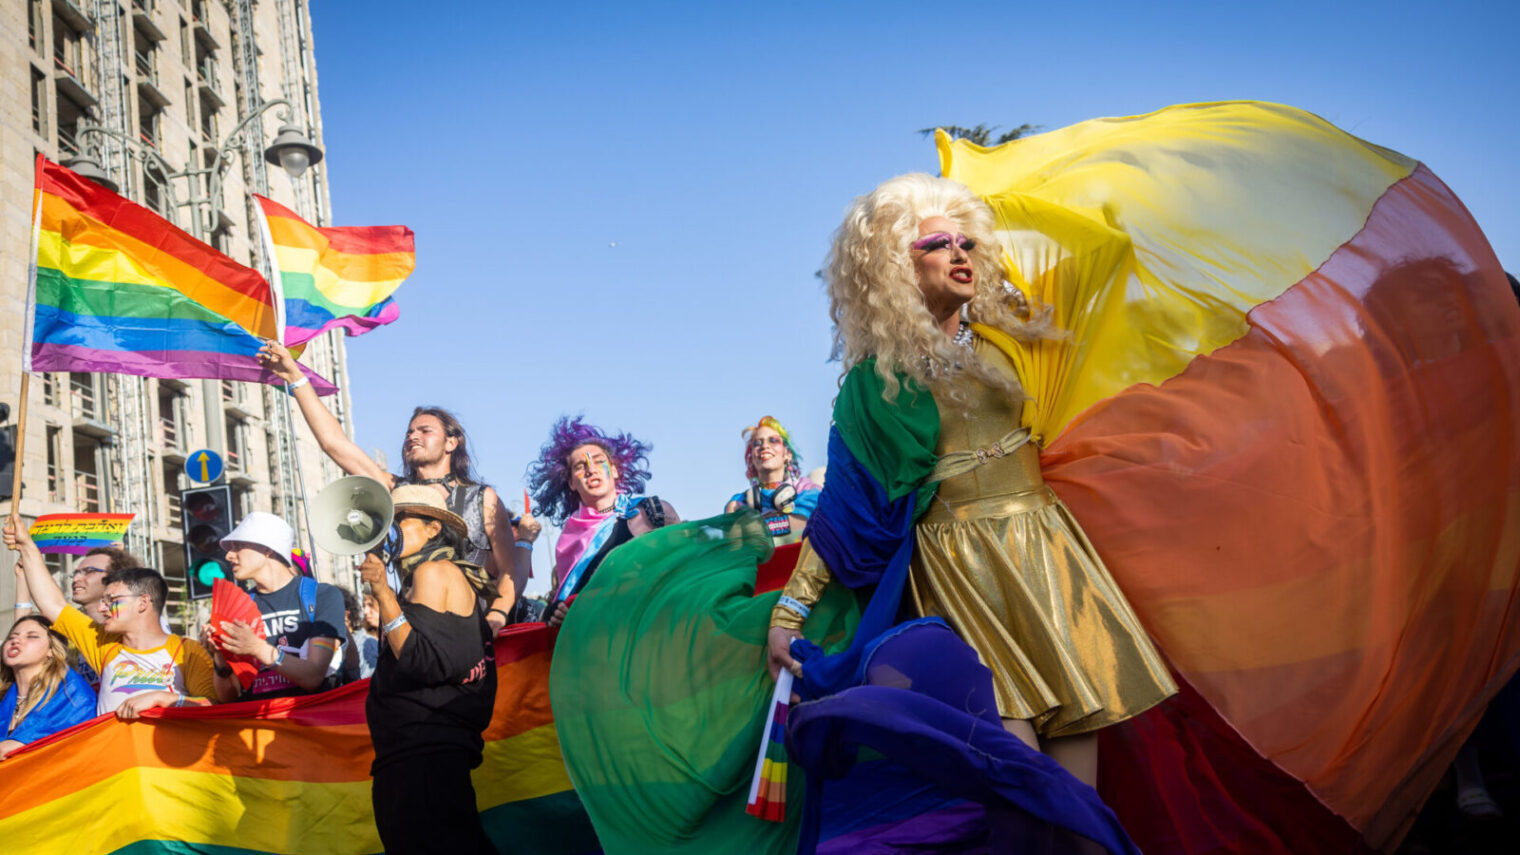 Timeline of LGBTQ rights in Israel